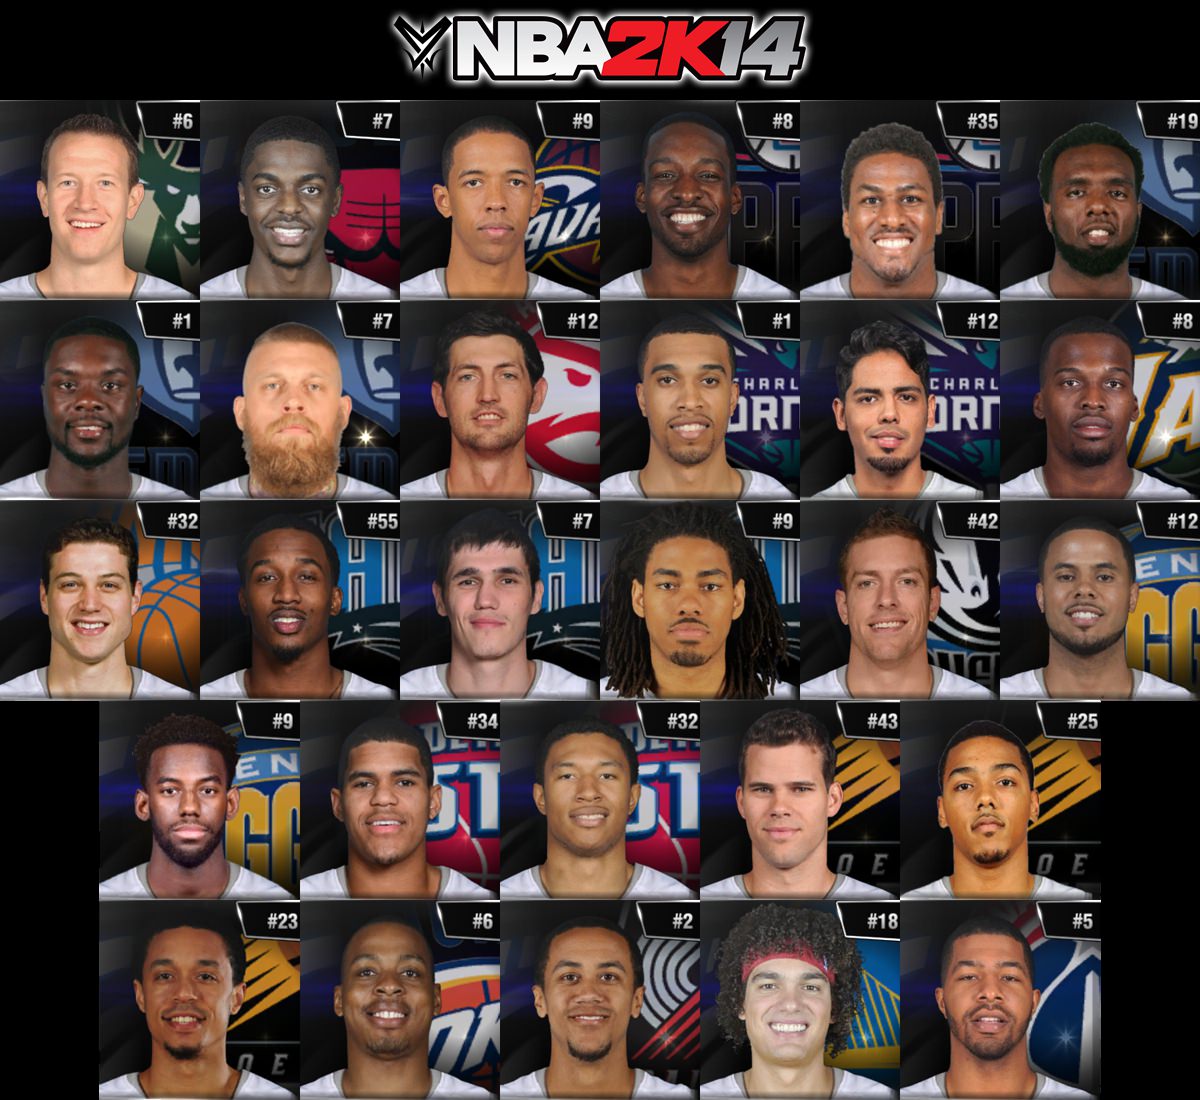 how to trade players in nba 2k14